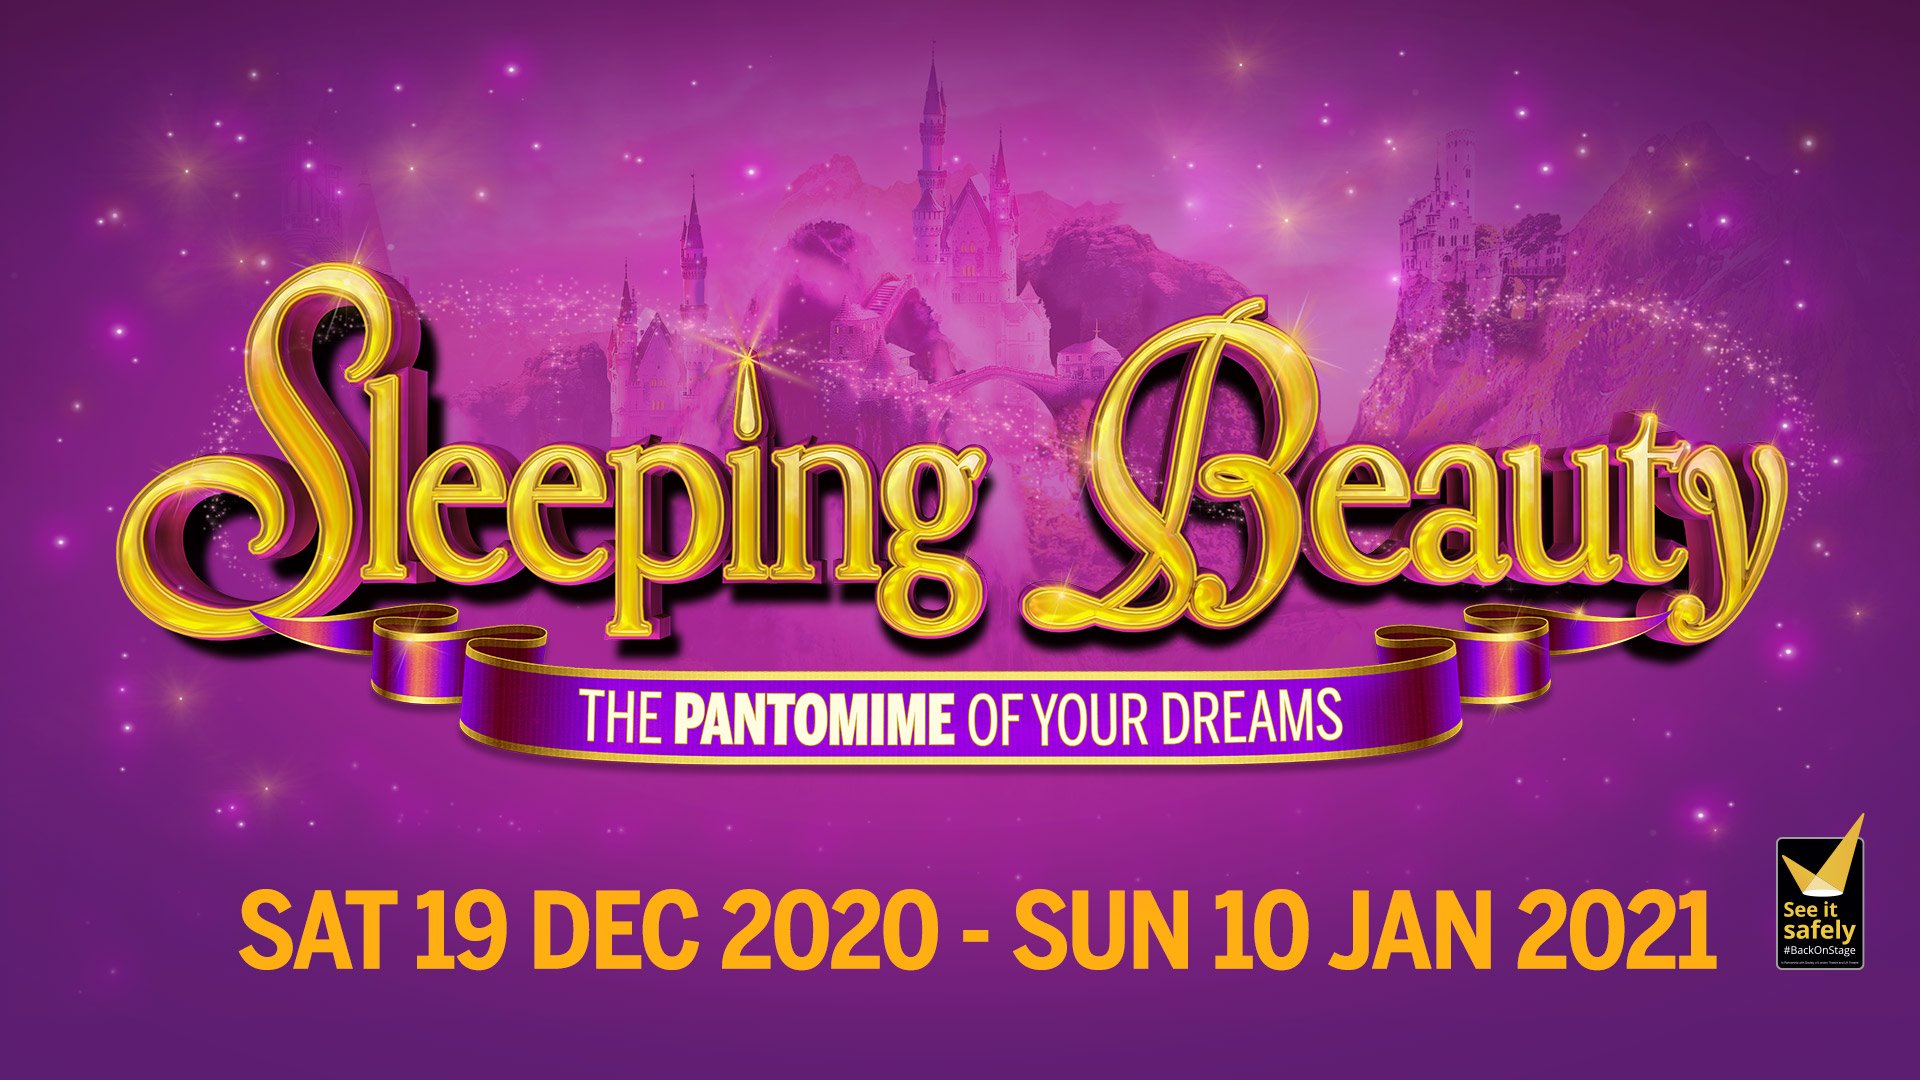 Oh Yes It Is! Pantomime is coming to MK Theatre